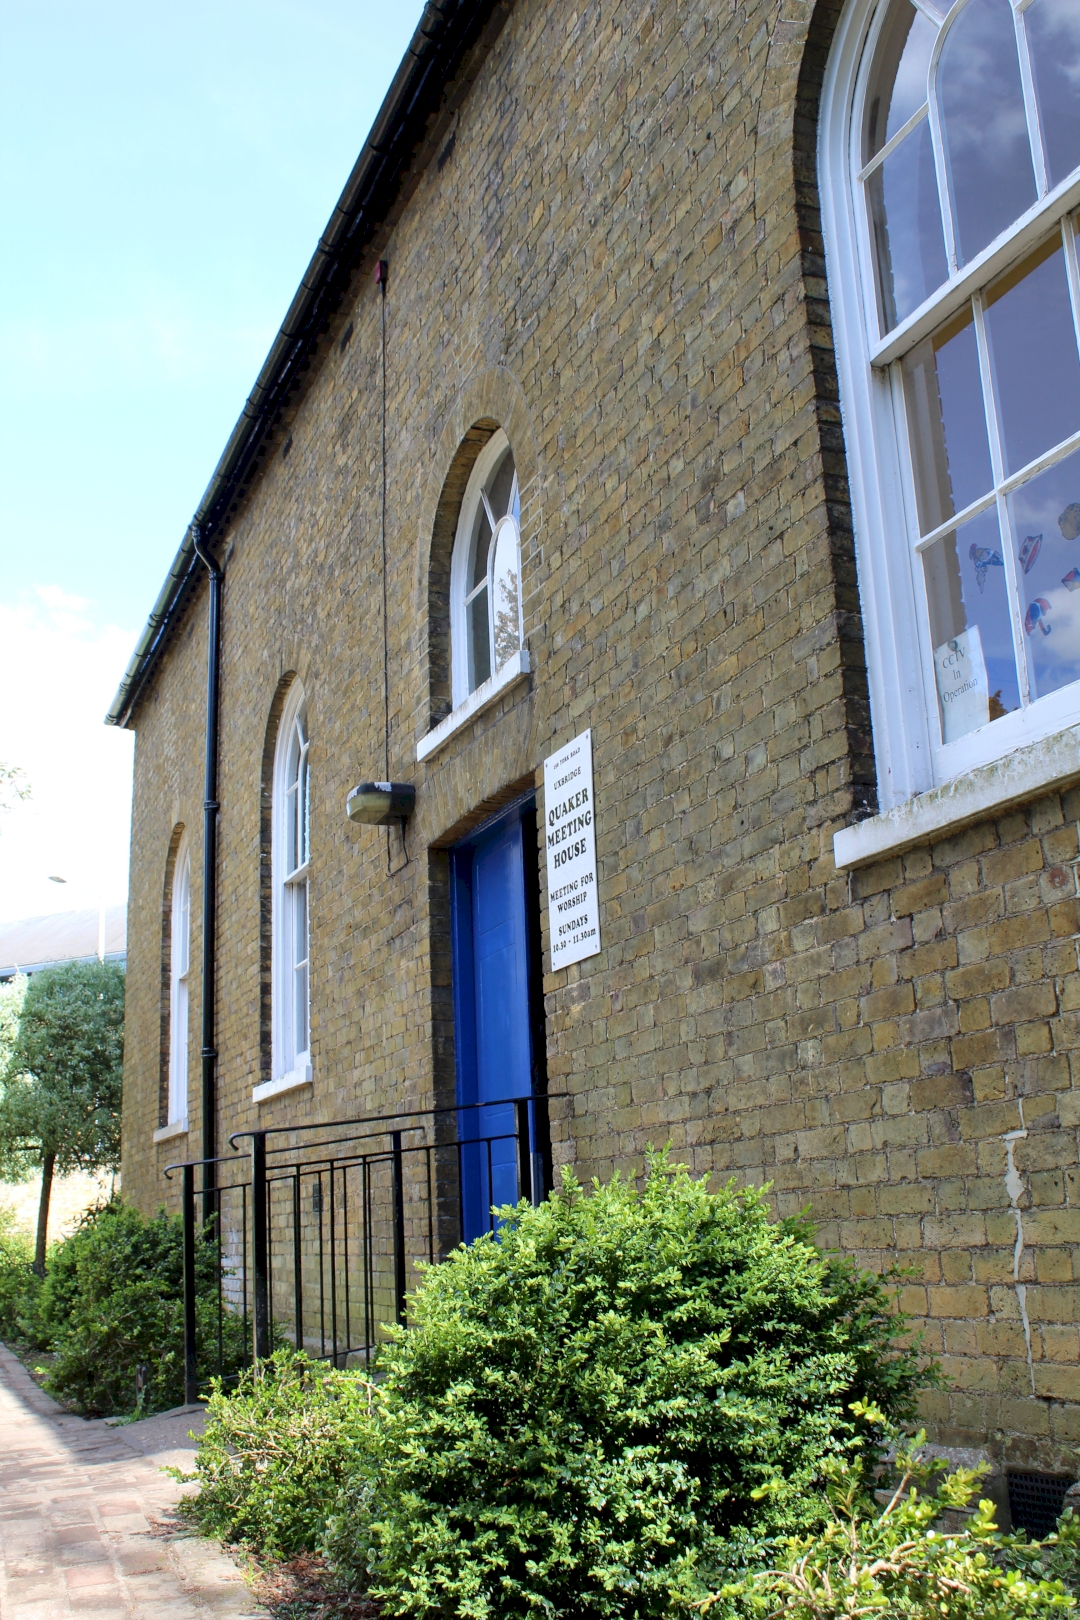 Front door of Uxbridge Meeting House as shown from the side.